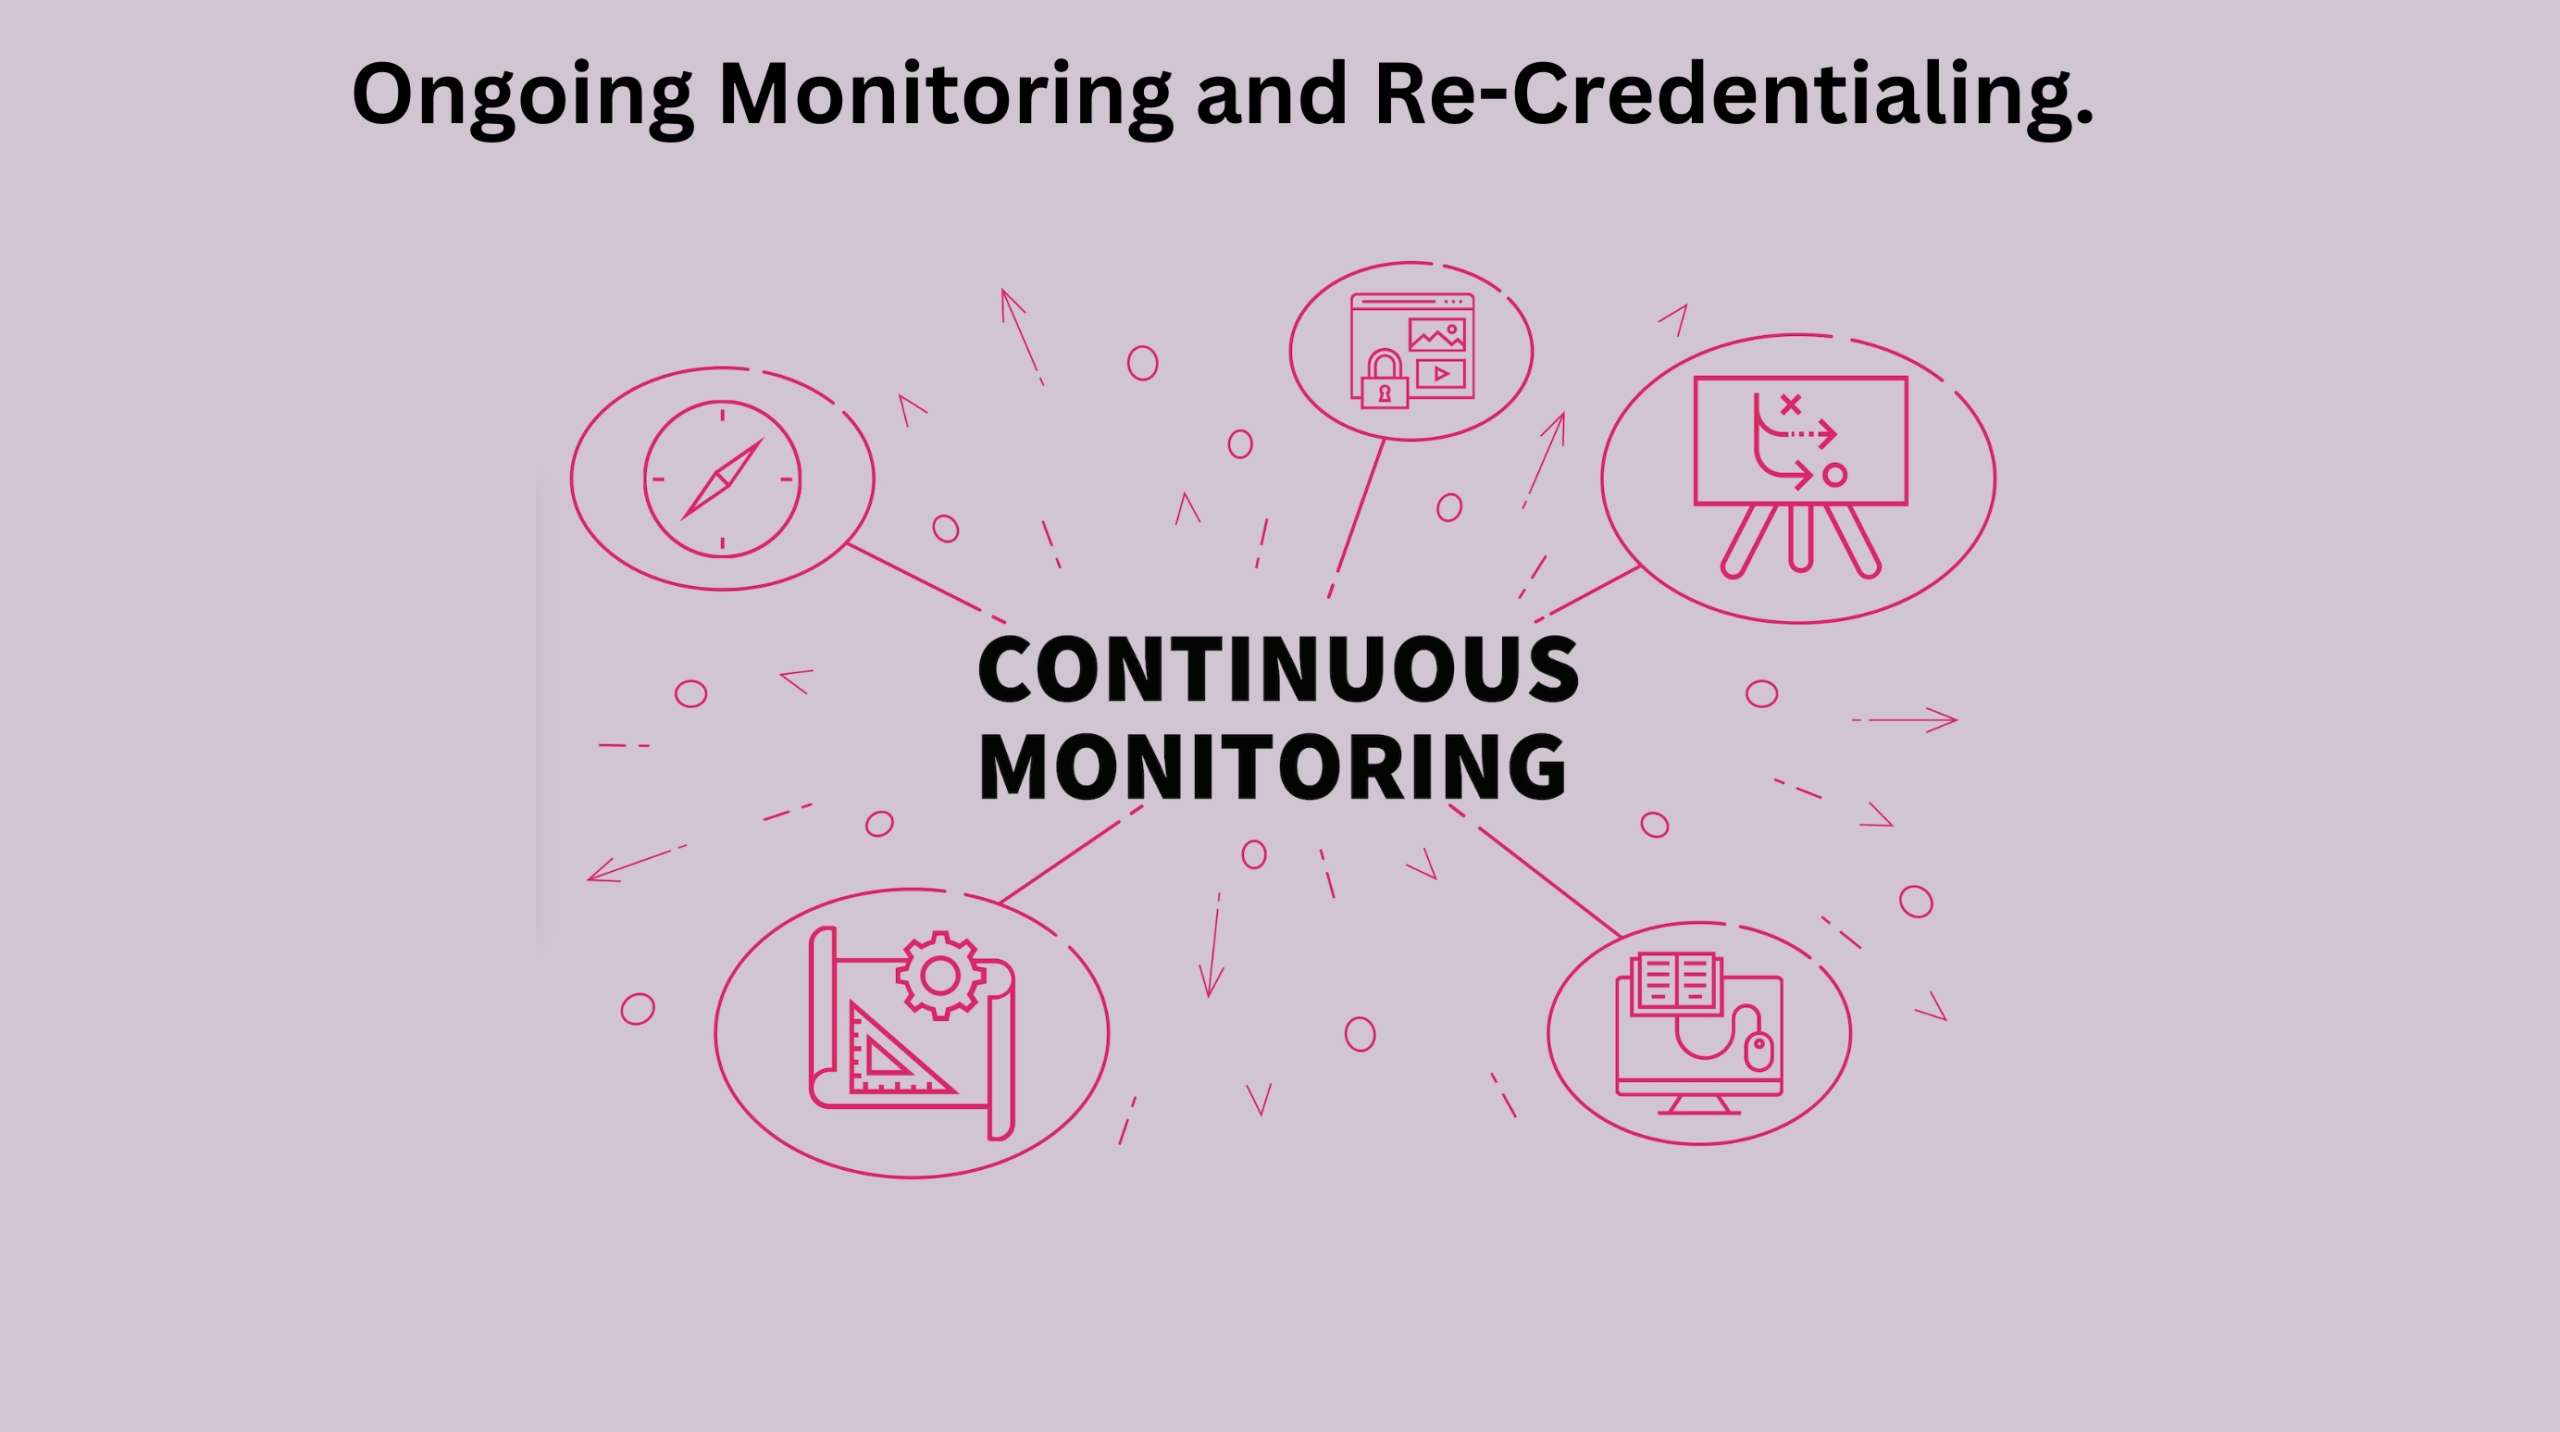 Ongoing Monitoring and Re-Credentialing.